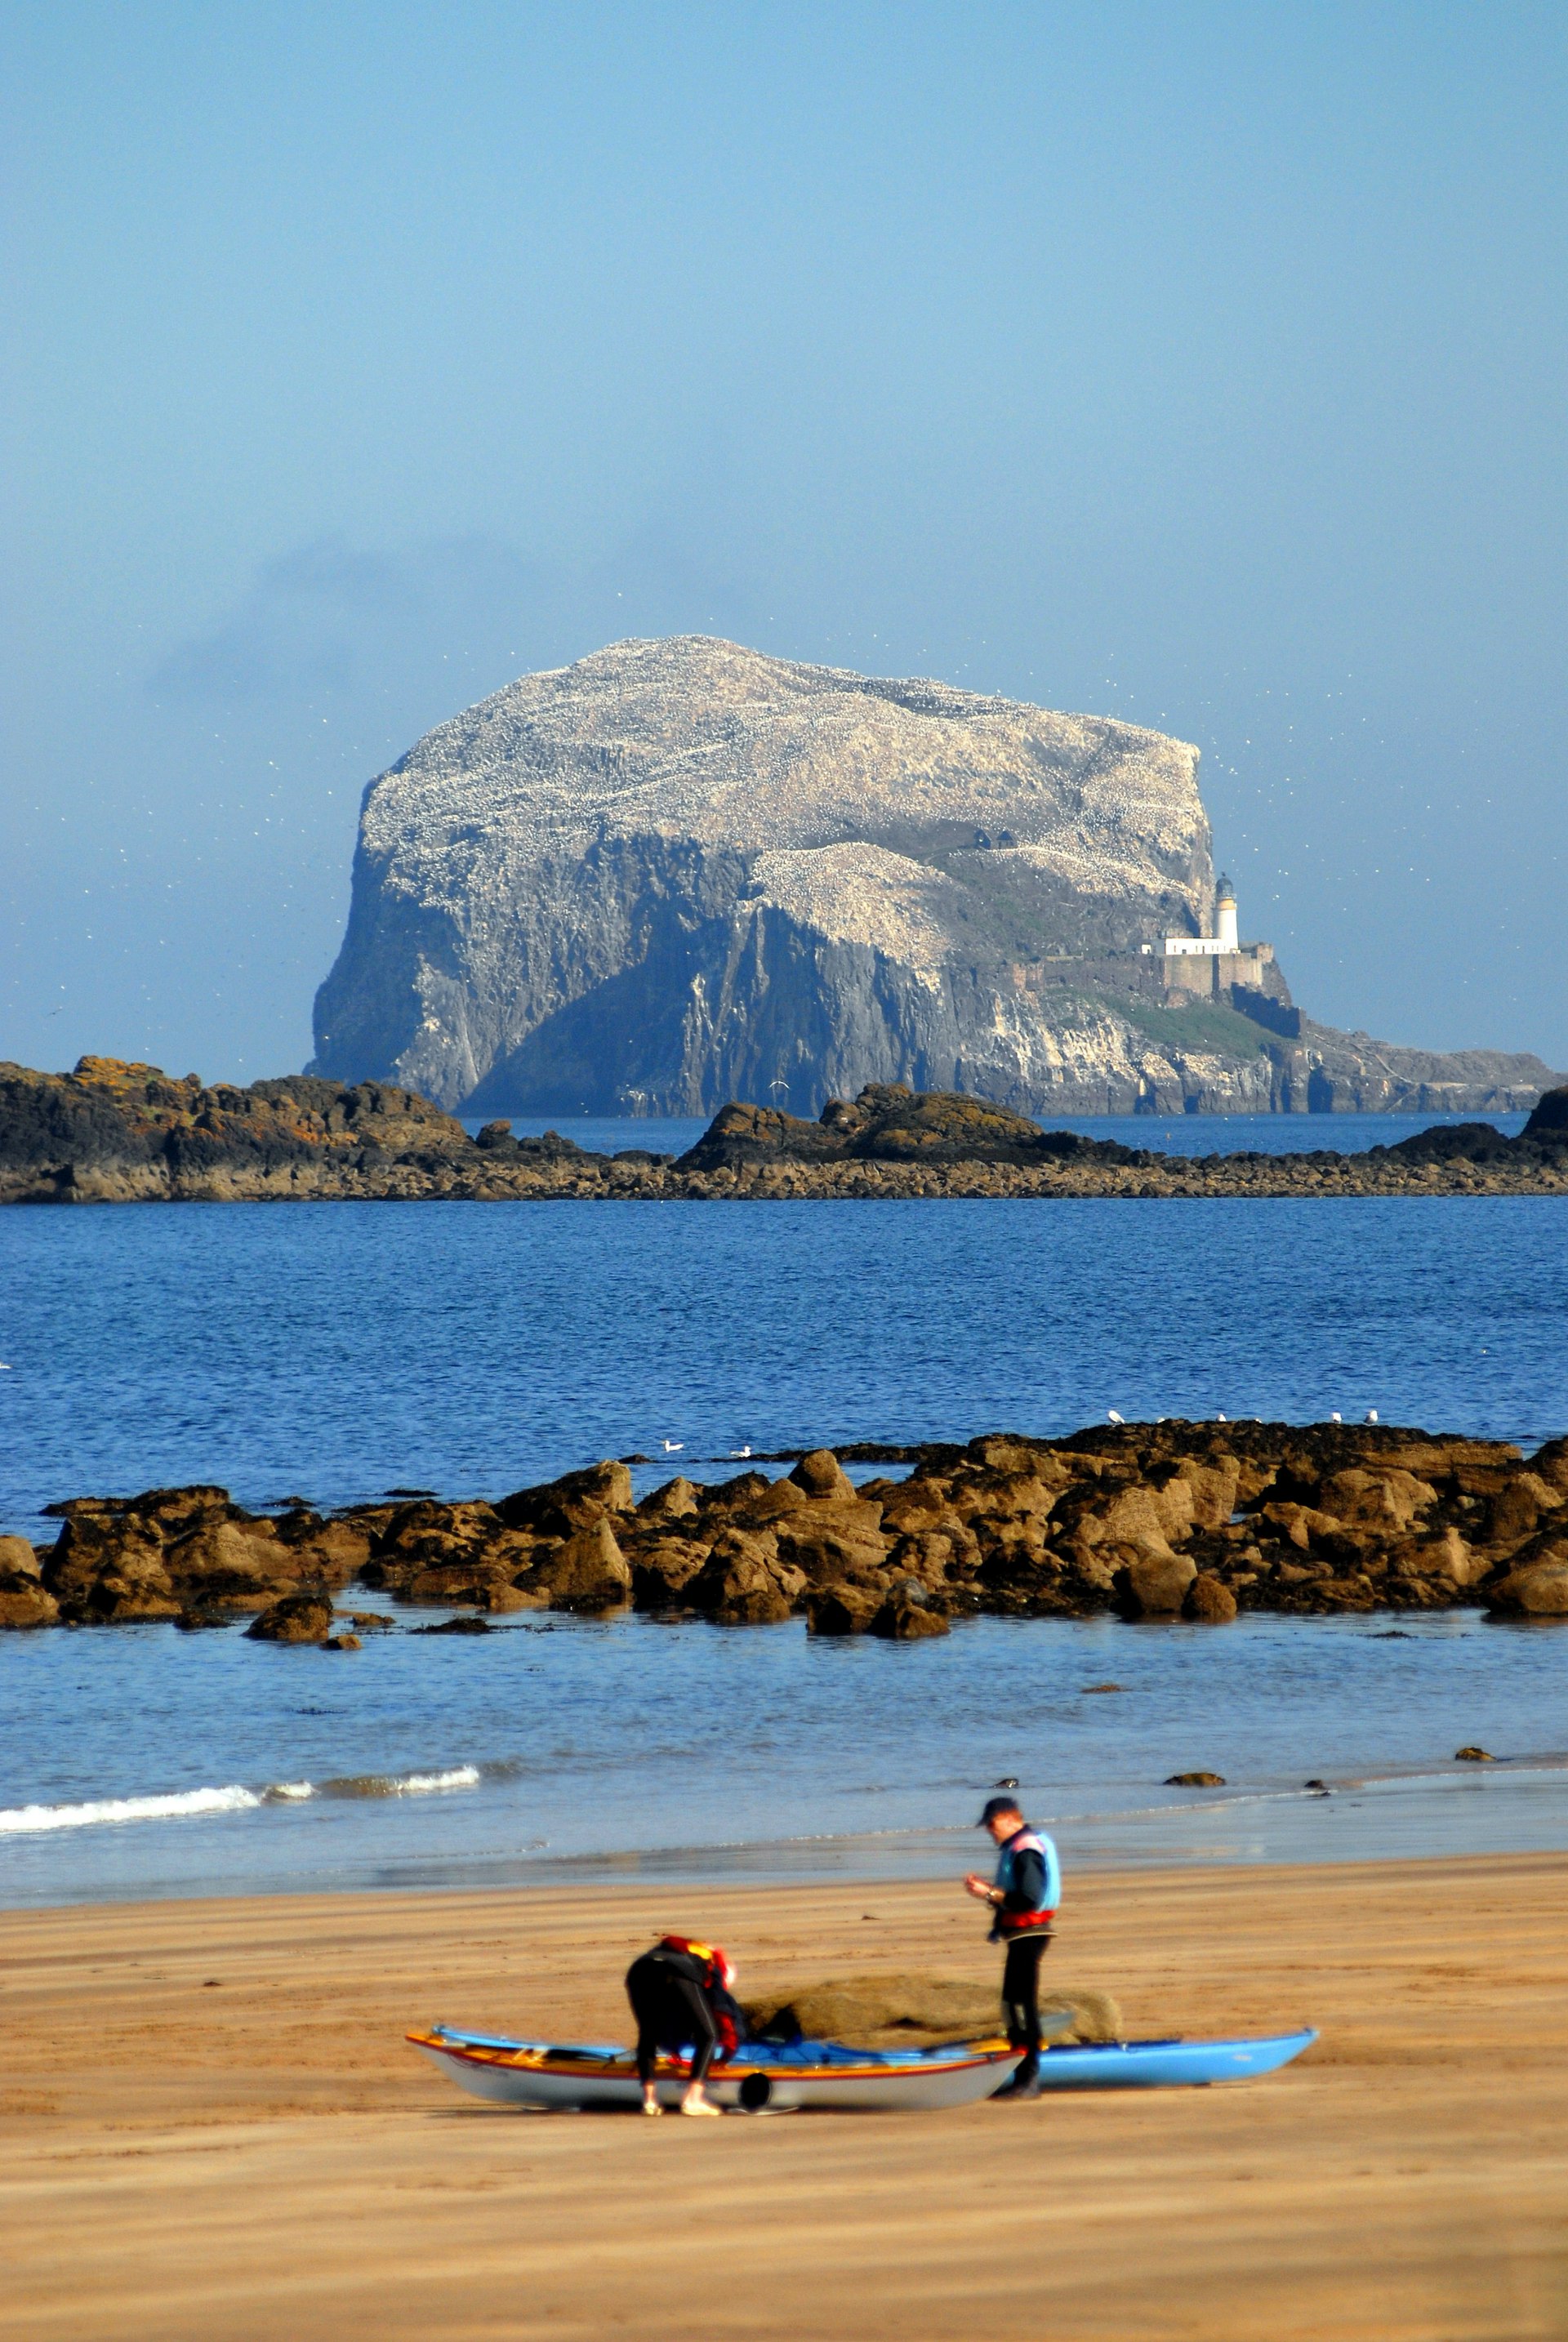 Bass rock off North Berwick at end of September white colour is thousands of gannets.